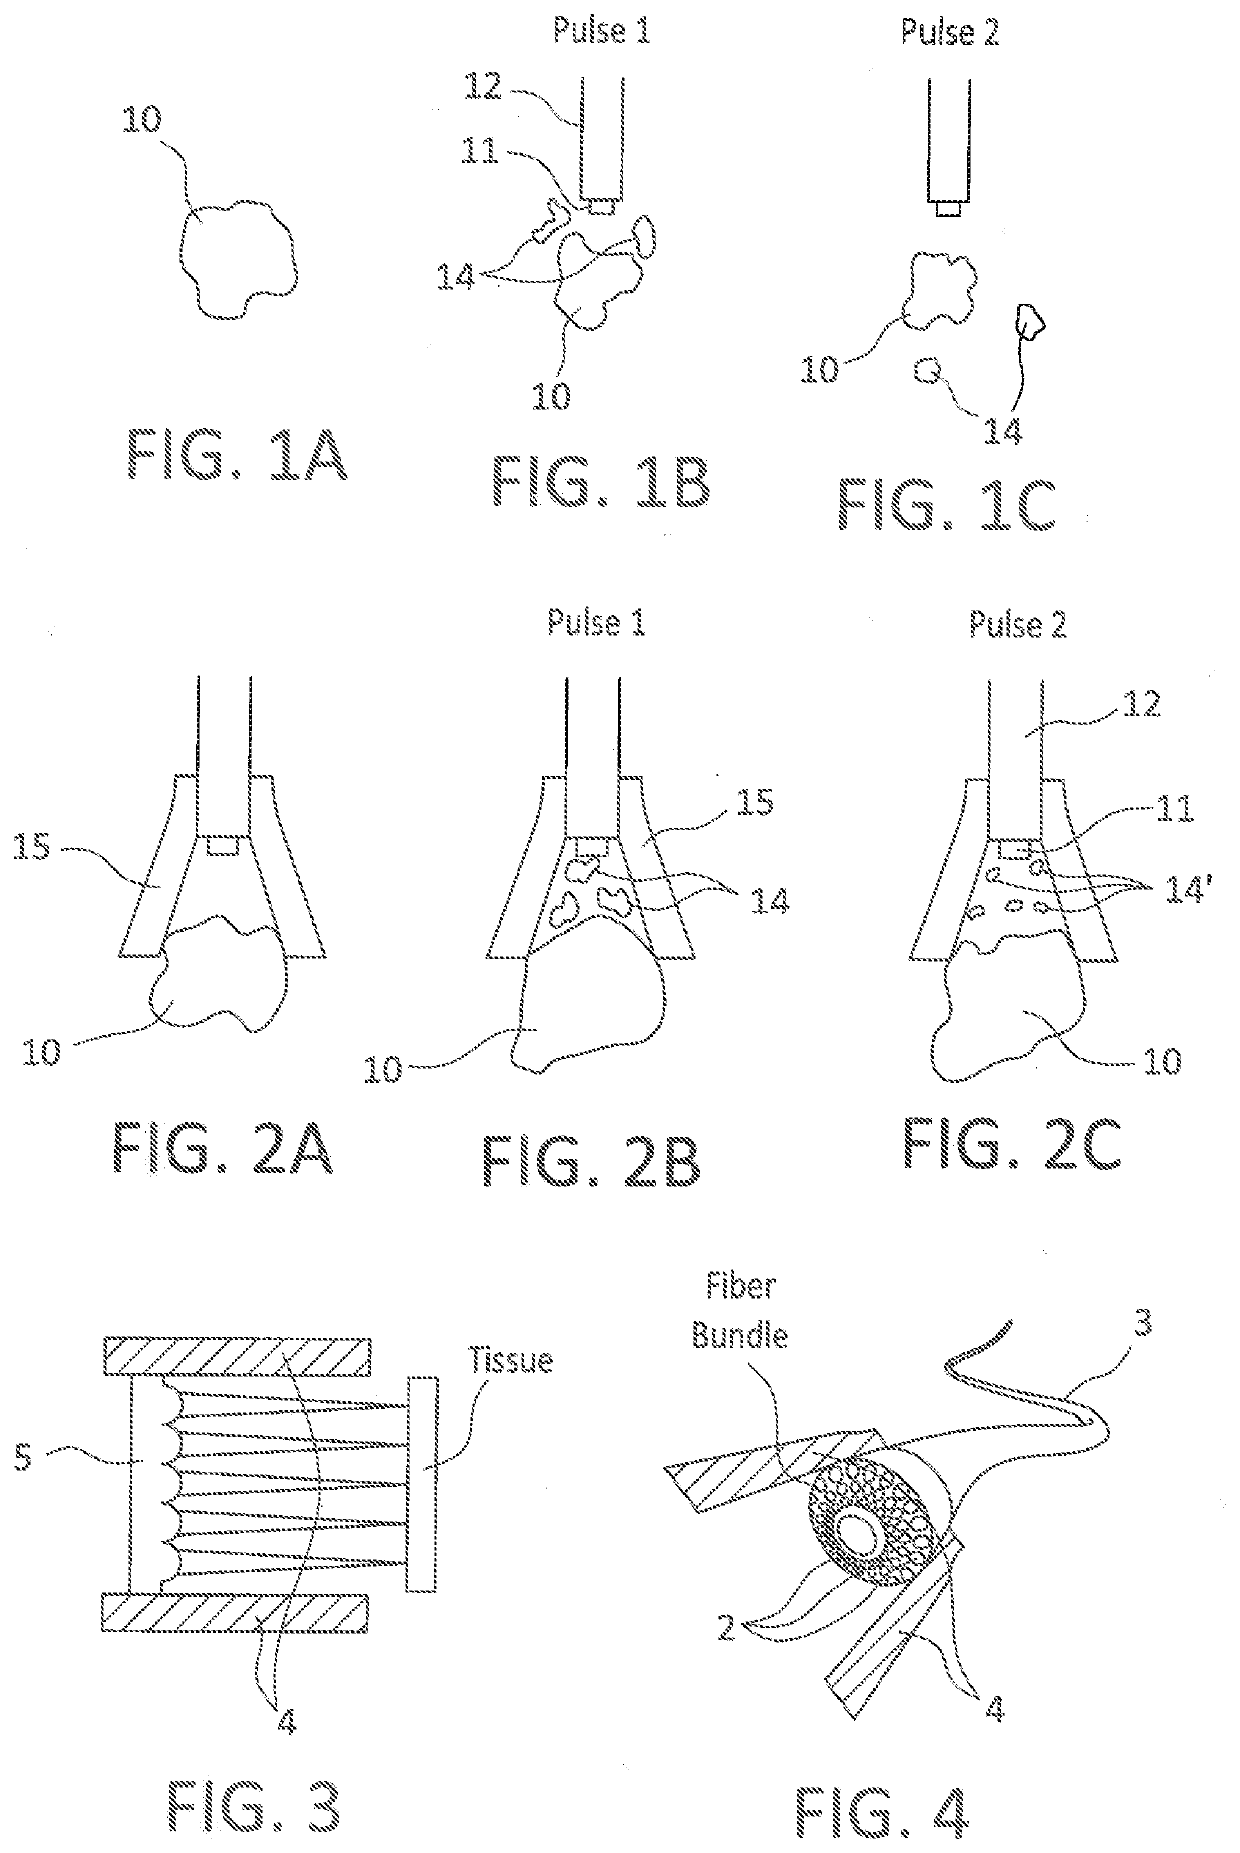 Method of reducing stone fragments to dust during laser lithotripsy